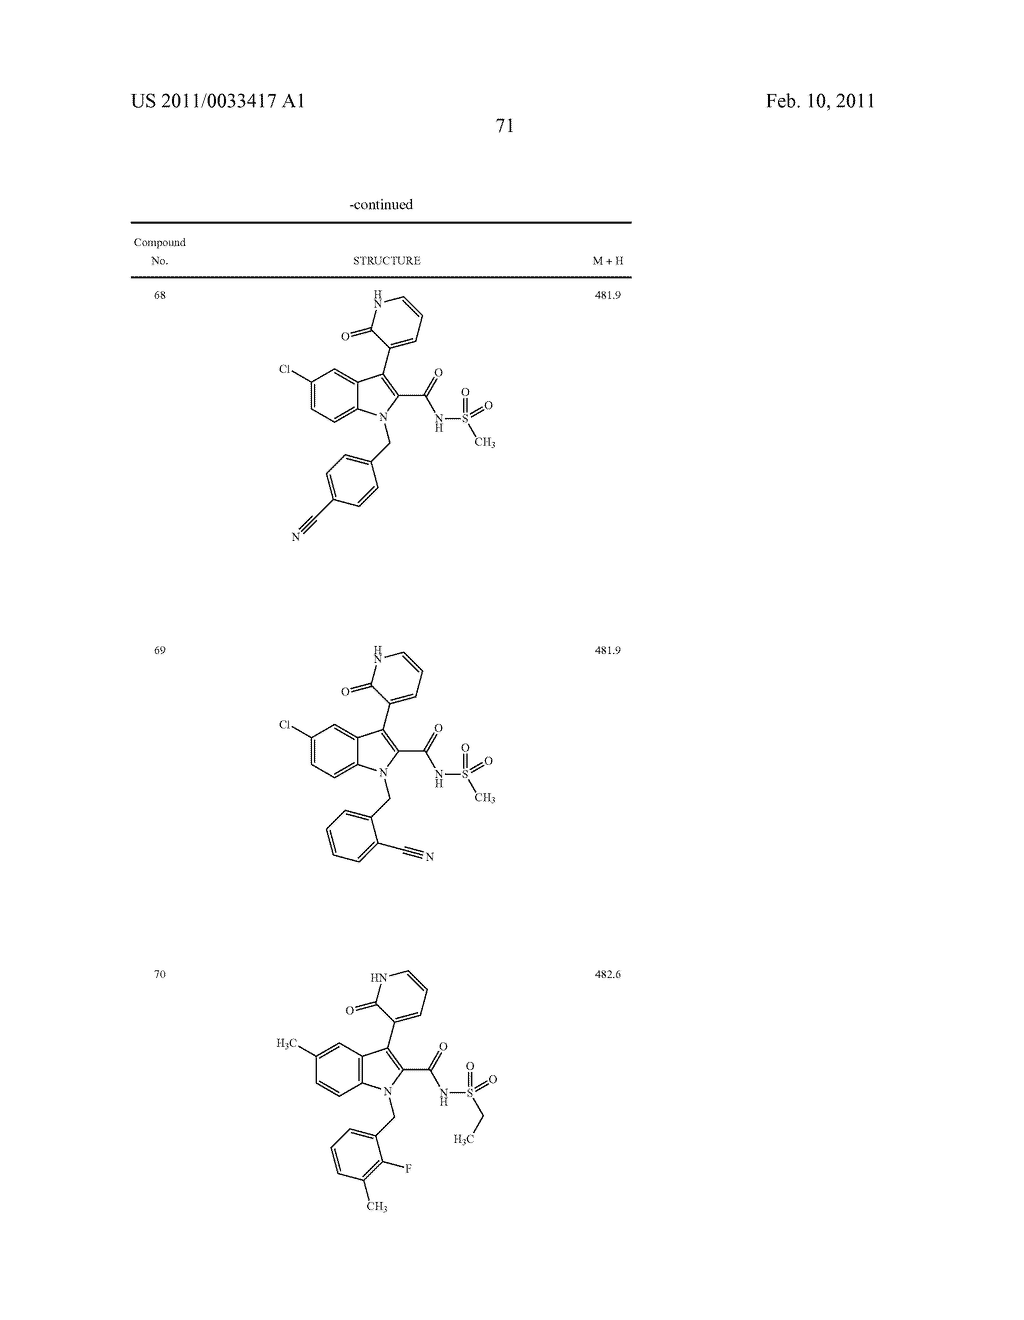 2,3-SUBSTITUTED INDOLE DERIVATIVES FOR TREATING VIRAL INFECTIONS - diagram, schematic, and image 72